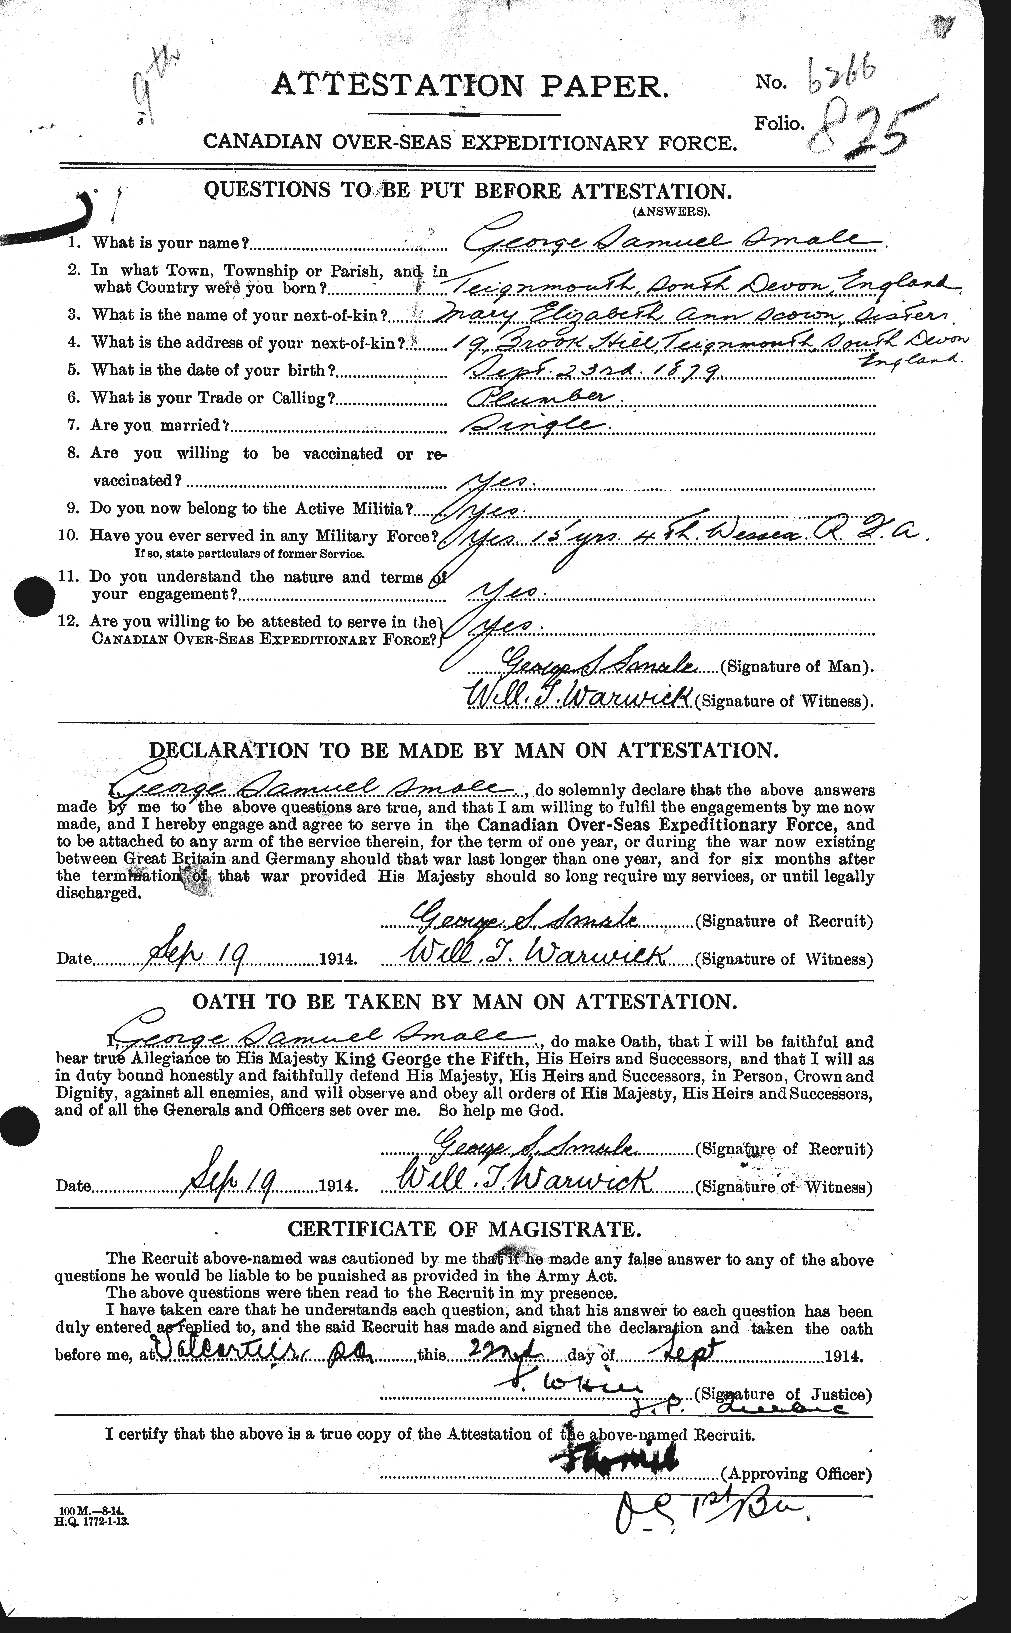 Personnel Records of the First World War - CEF 097644a